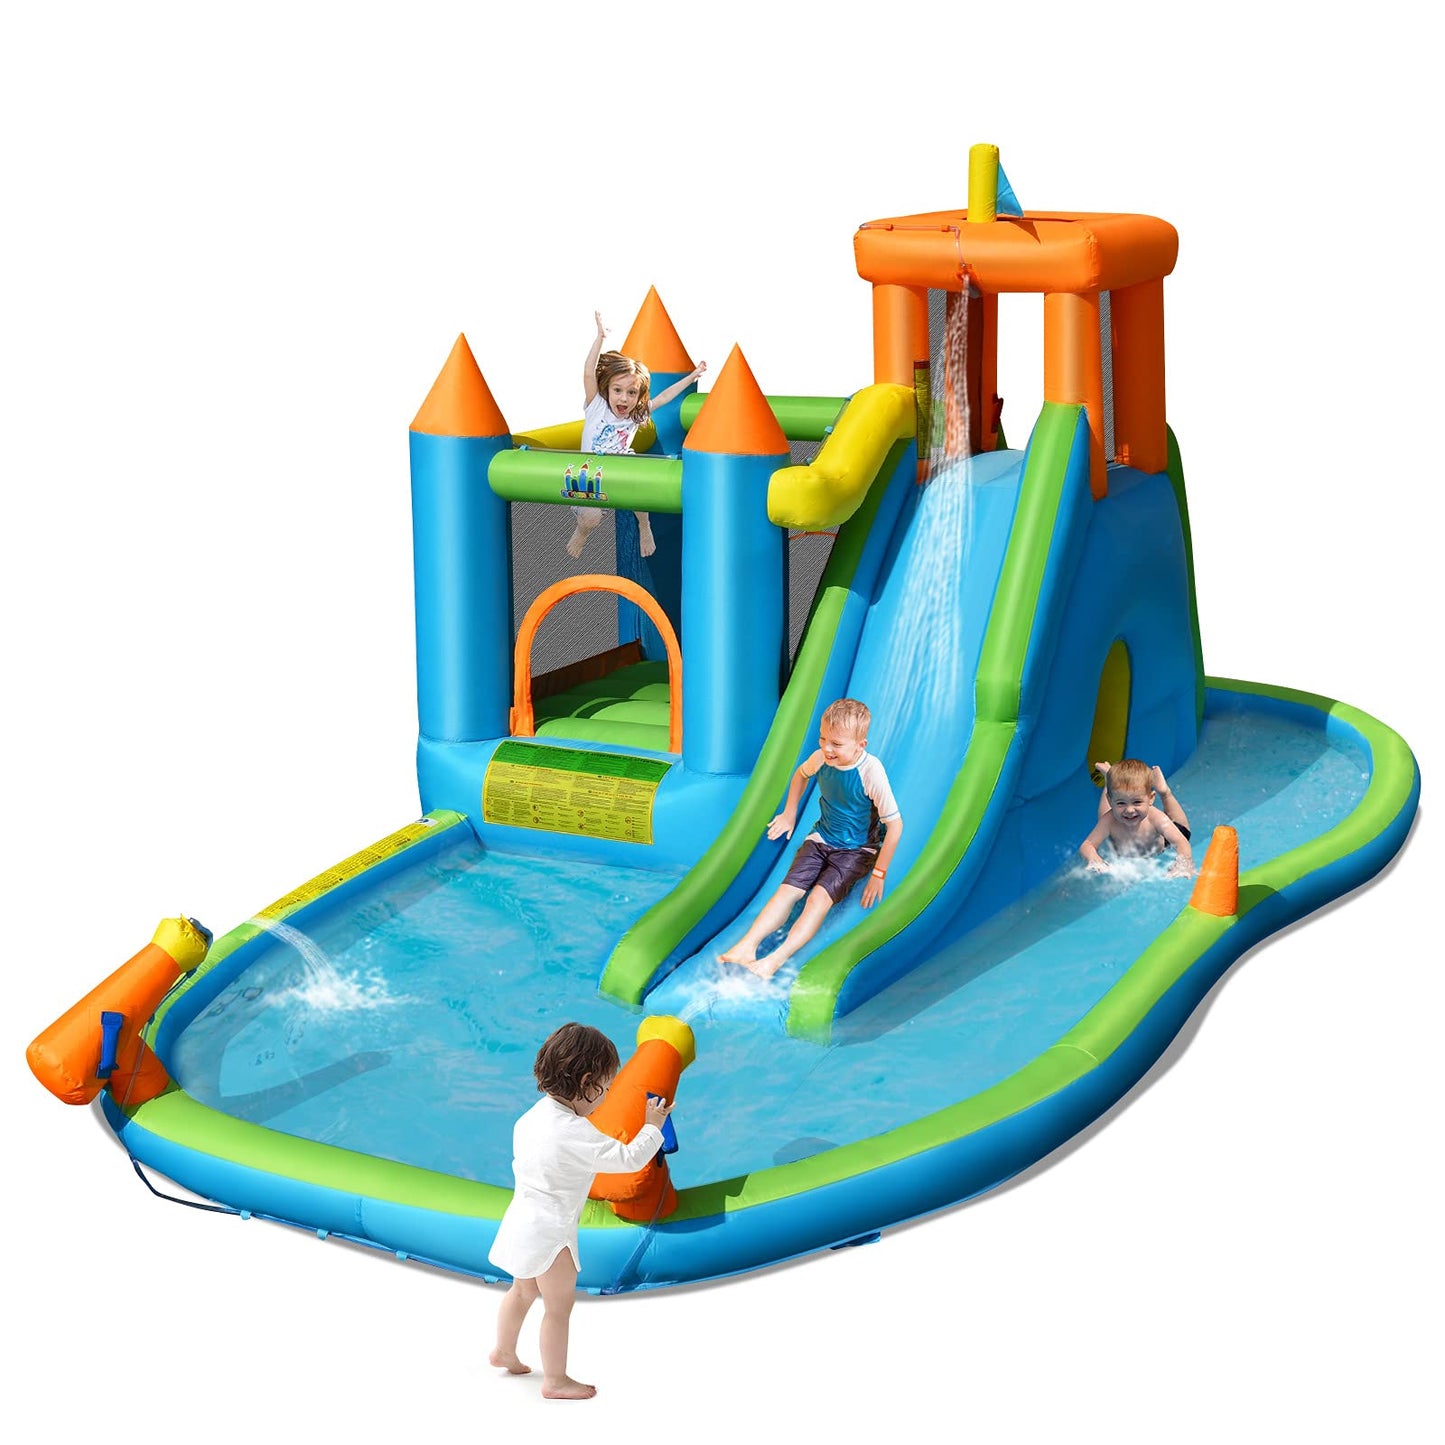 BOUNTECH Inflatable Water Slide, 8 in 1 Giant Waterslide Park Bounce House for Kids Backyard Outdoor Fun w/Splash Pool, Climbing, Blow up Water Slides Inflatables for Kids and Adults Party Gifts Without Air Blower